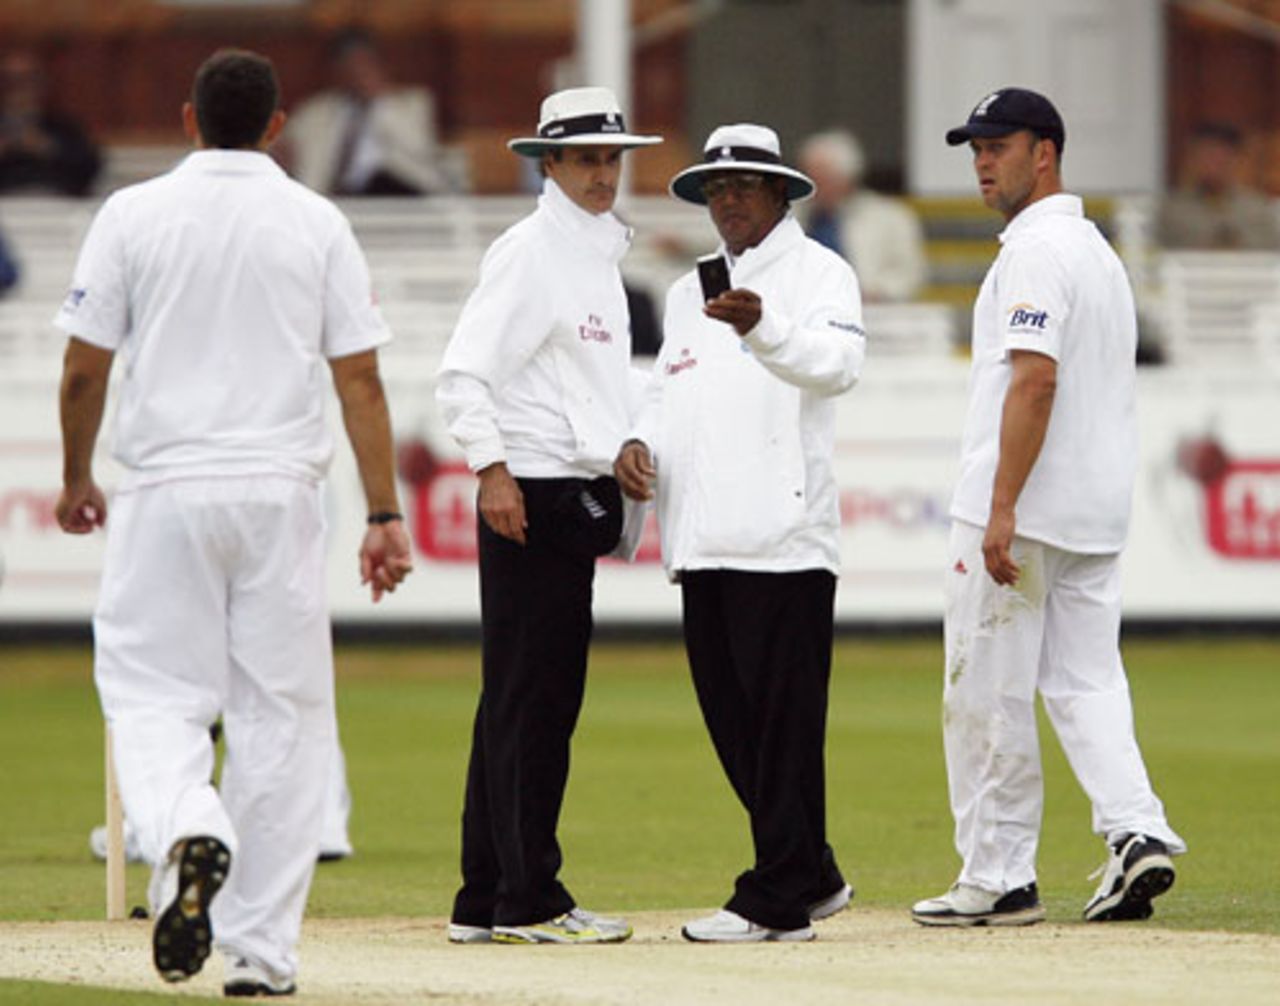 The umpires check for bad light, England v Bangladesh, 1st Test, Lord's, 3rd day, May 29, 2010